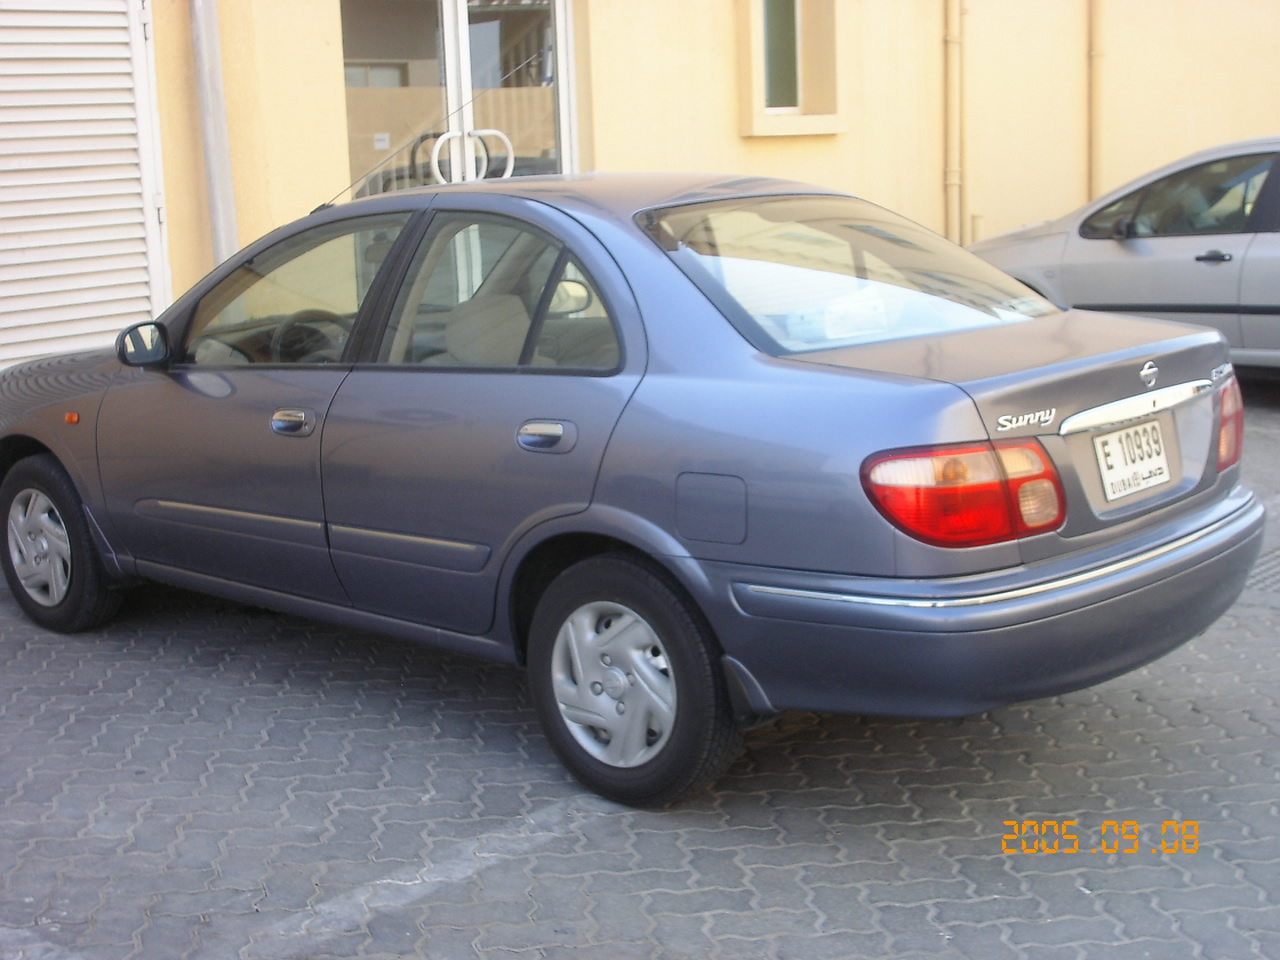 2003 Nissan sunny review #10